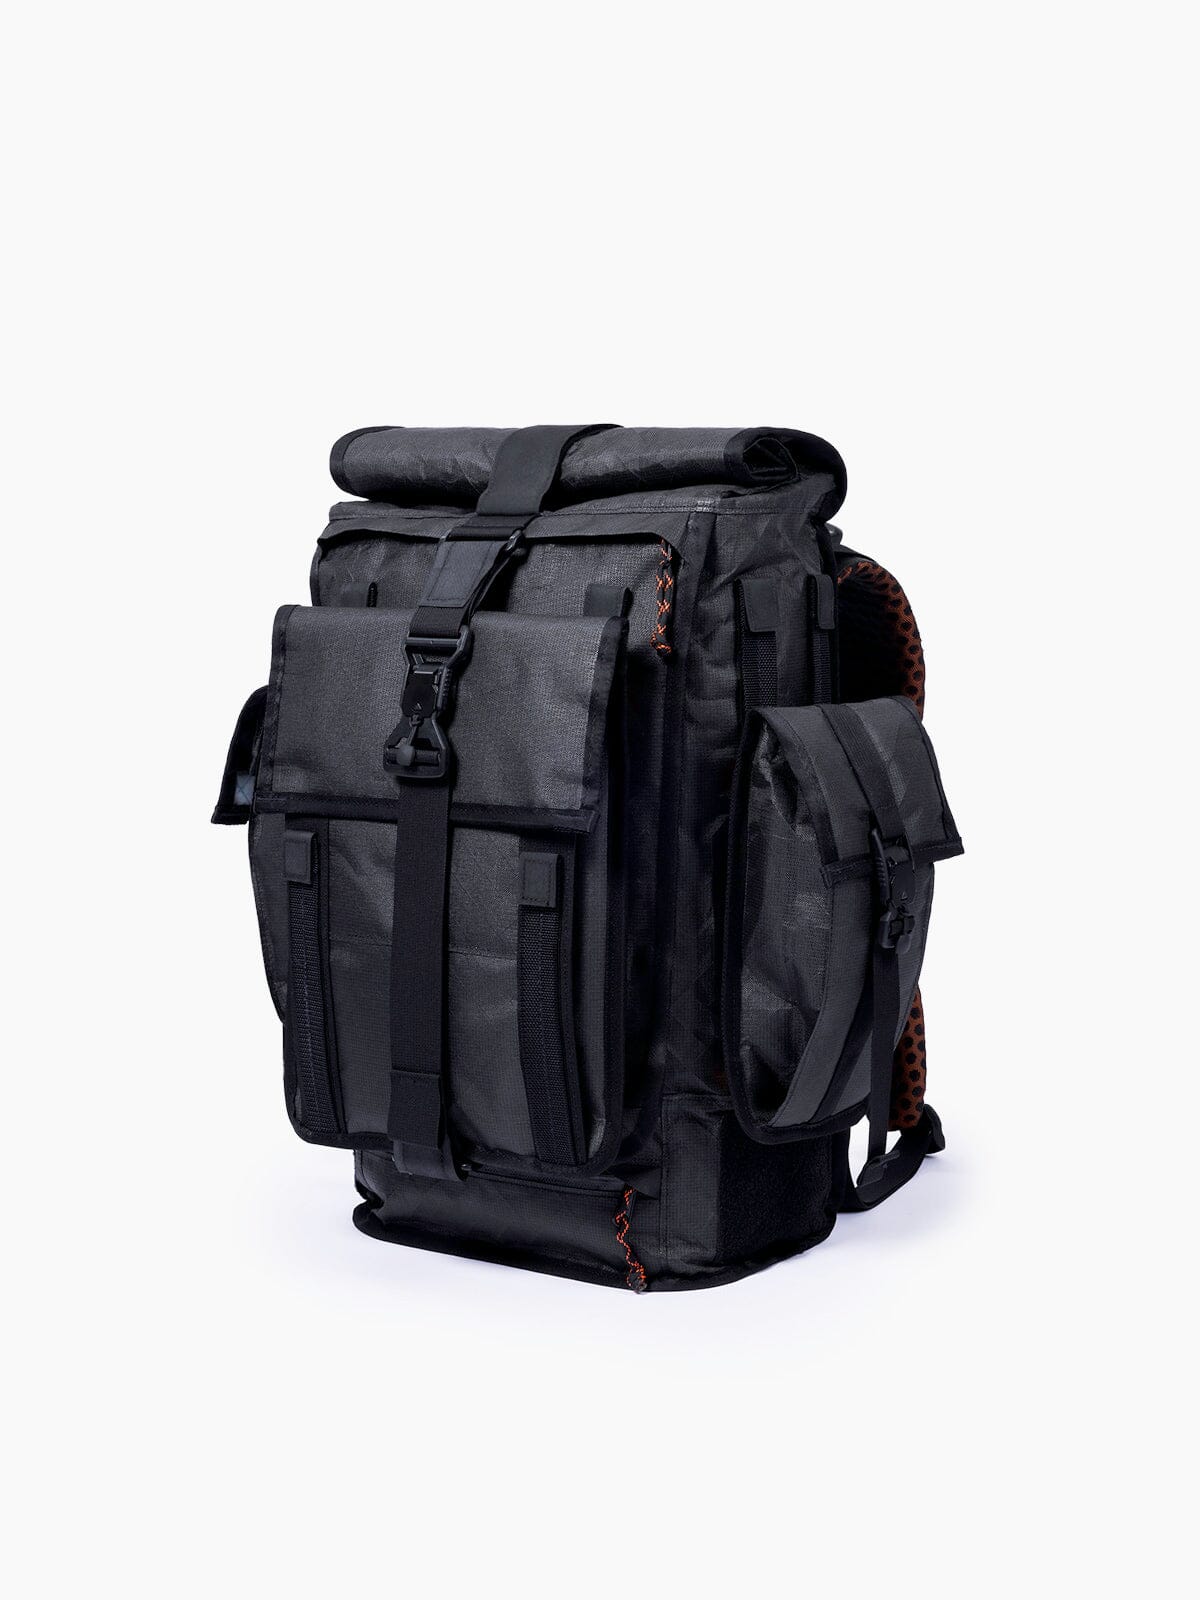 Mission Workshop X Carryology Side Roll by Mission Workshop - Weatherproof Bags & Technical Apparel - San Francisco & Los Angeles - Built to endure - Guaranteed forever